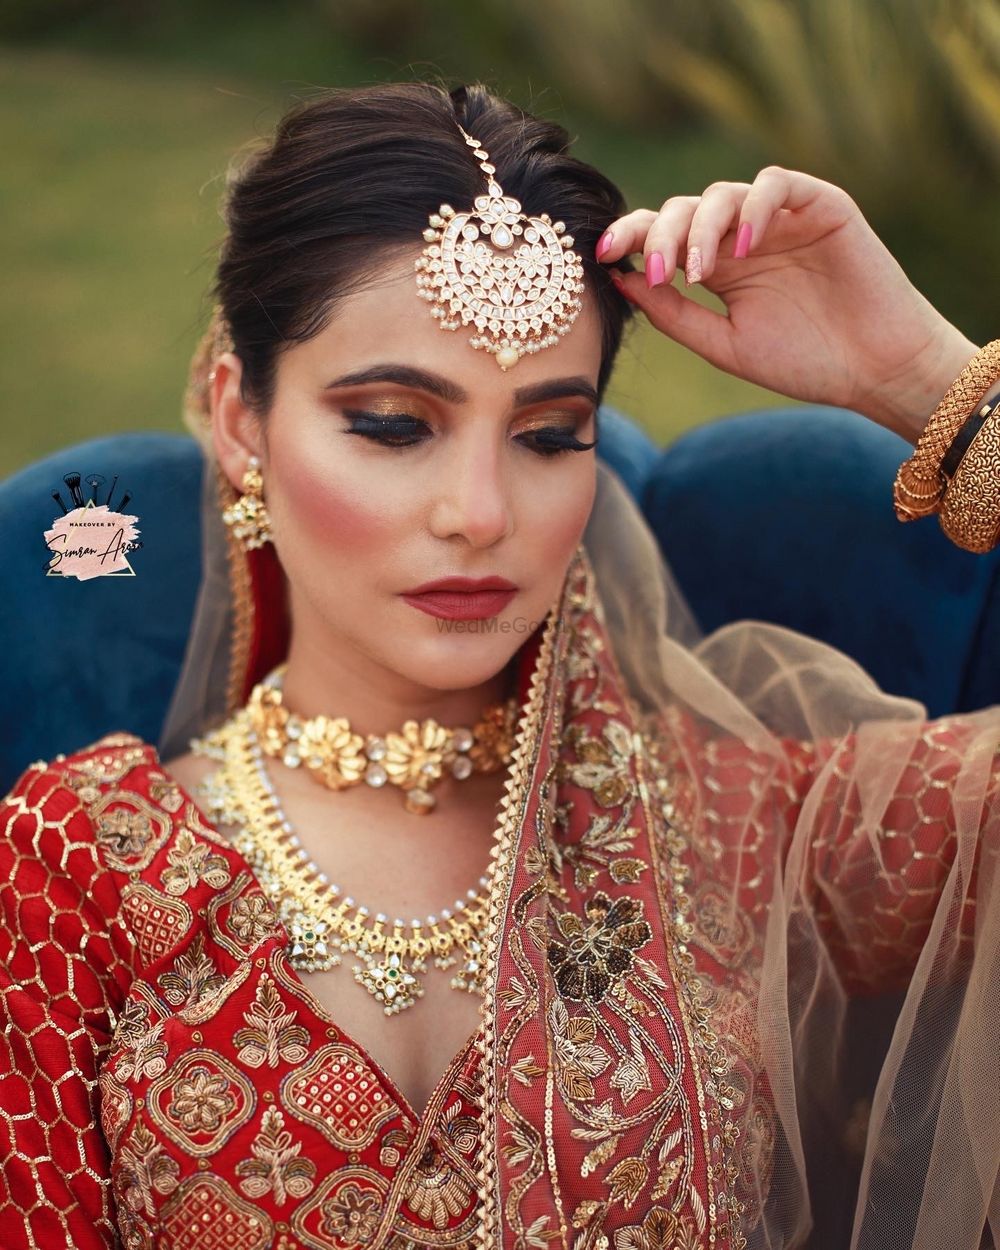 Photo From Bride Manpreet Kaur - By Makeovers by Simran Arora